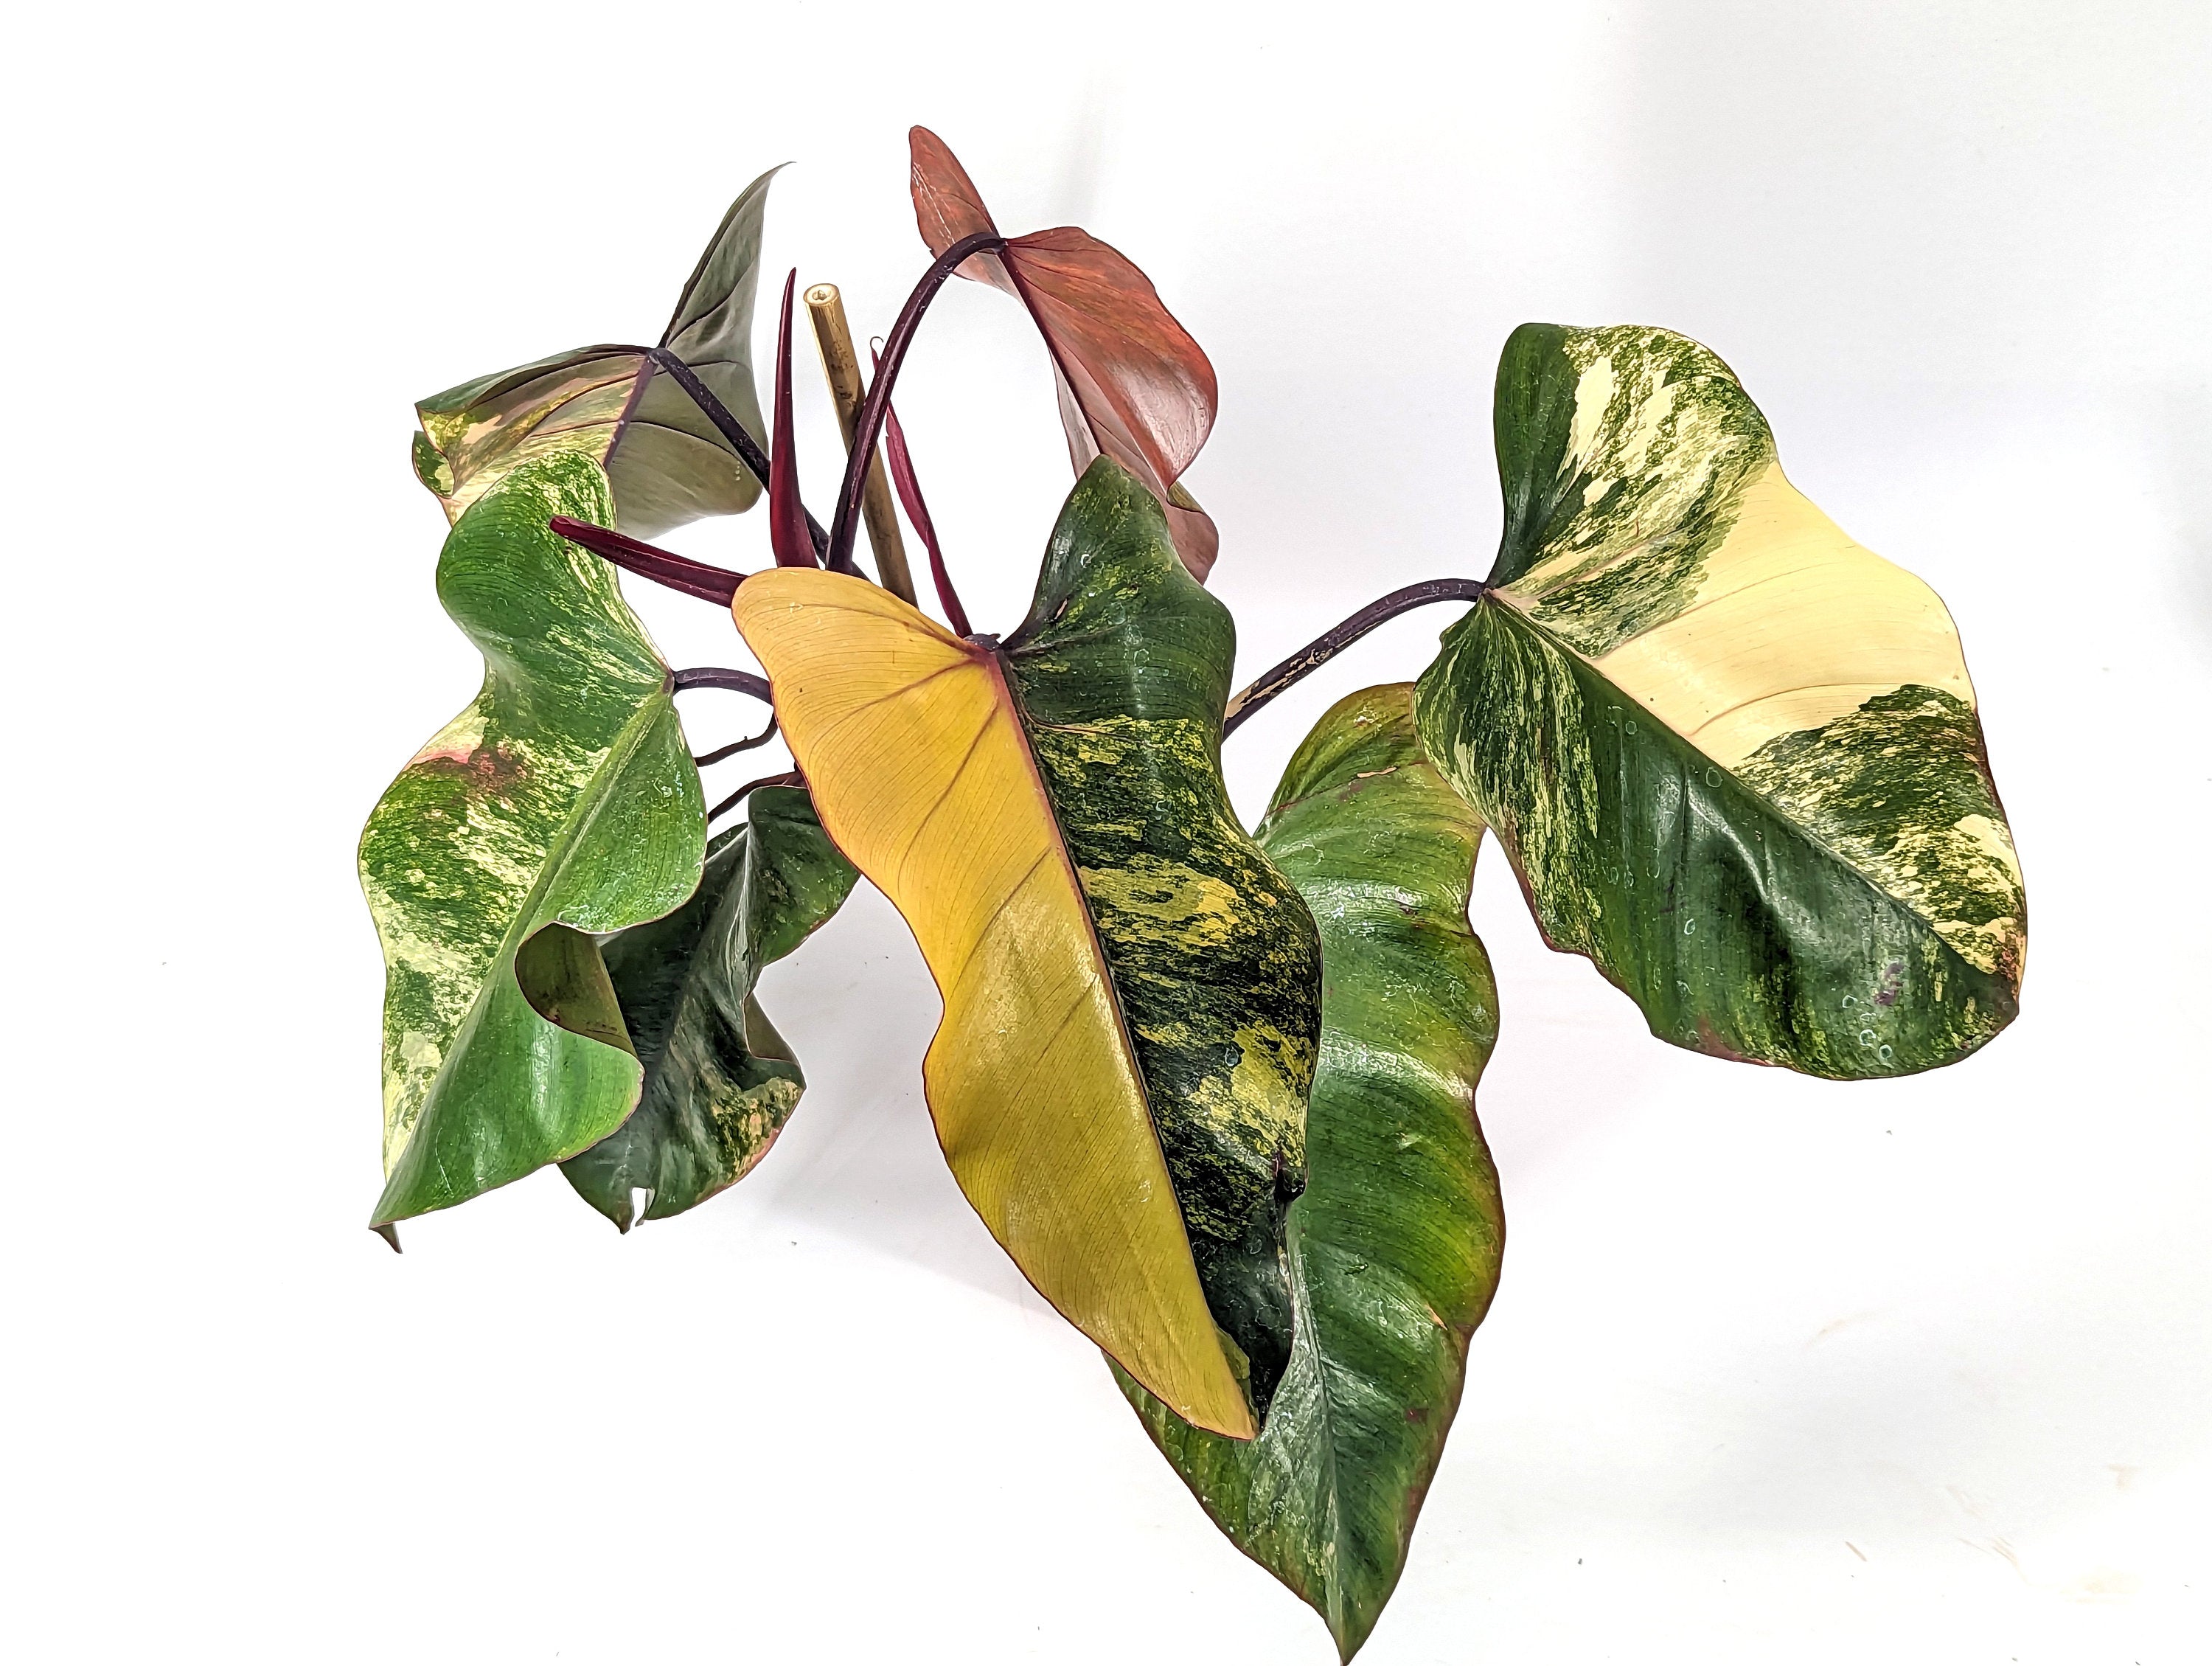 HALF MOON Strawberry Shake Philodendron Yellow Leaf 6 inch Pot - Exact Plant Pictured One Of a Kind Amazing Color